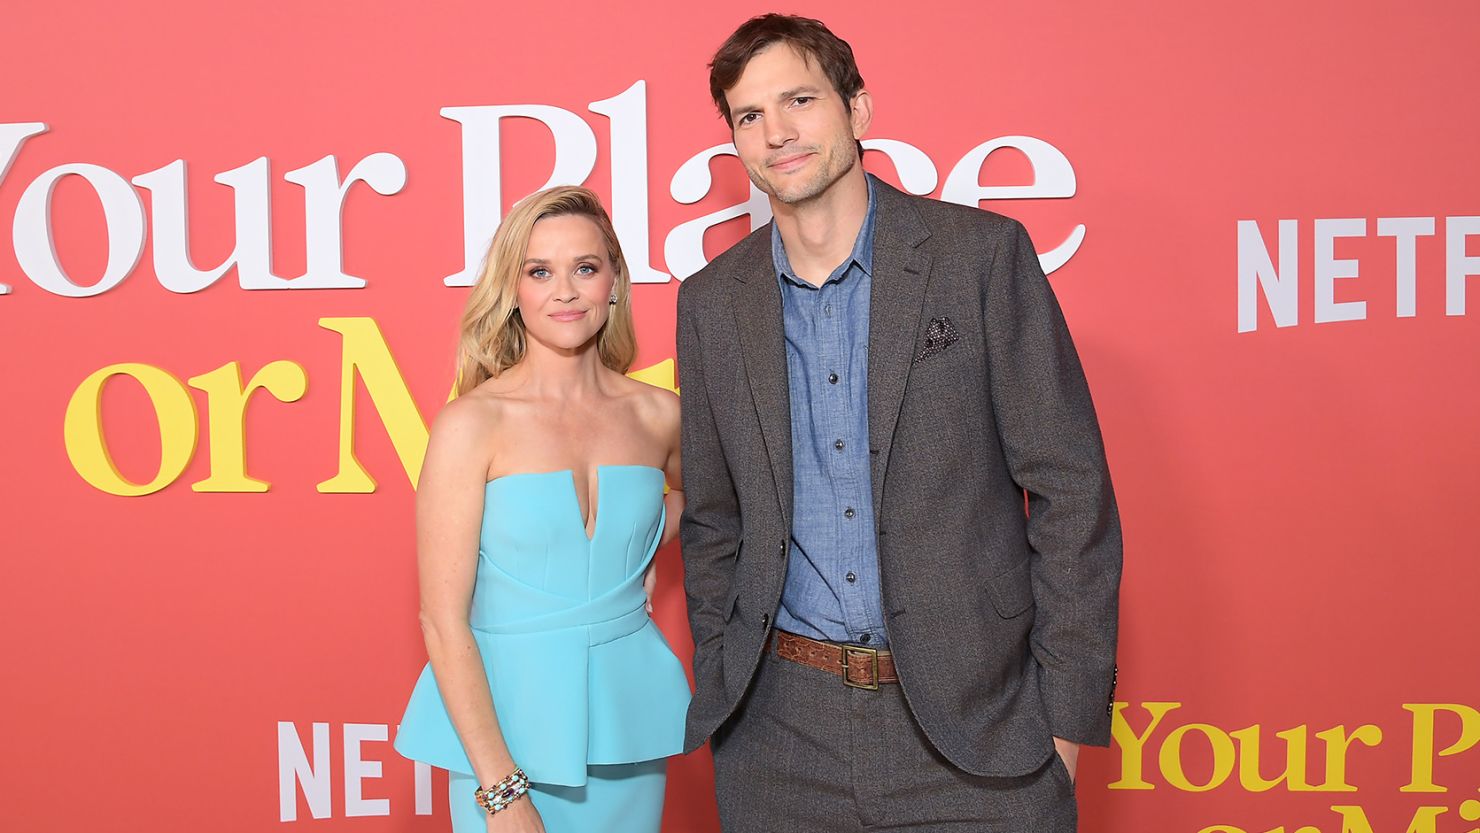 Reese Witherspoon and Ashton Kutcher attend Netflix's "Your Place or Mine" world premiere at Regency Village Theater on February 02, 2023 in Los Angeles, California. 